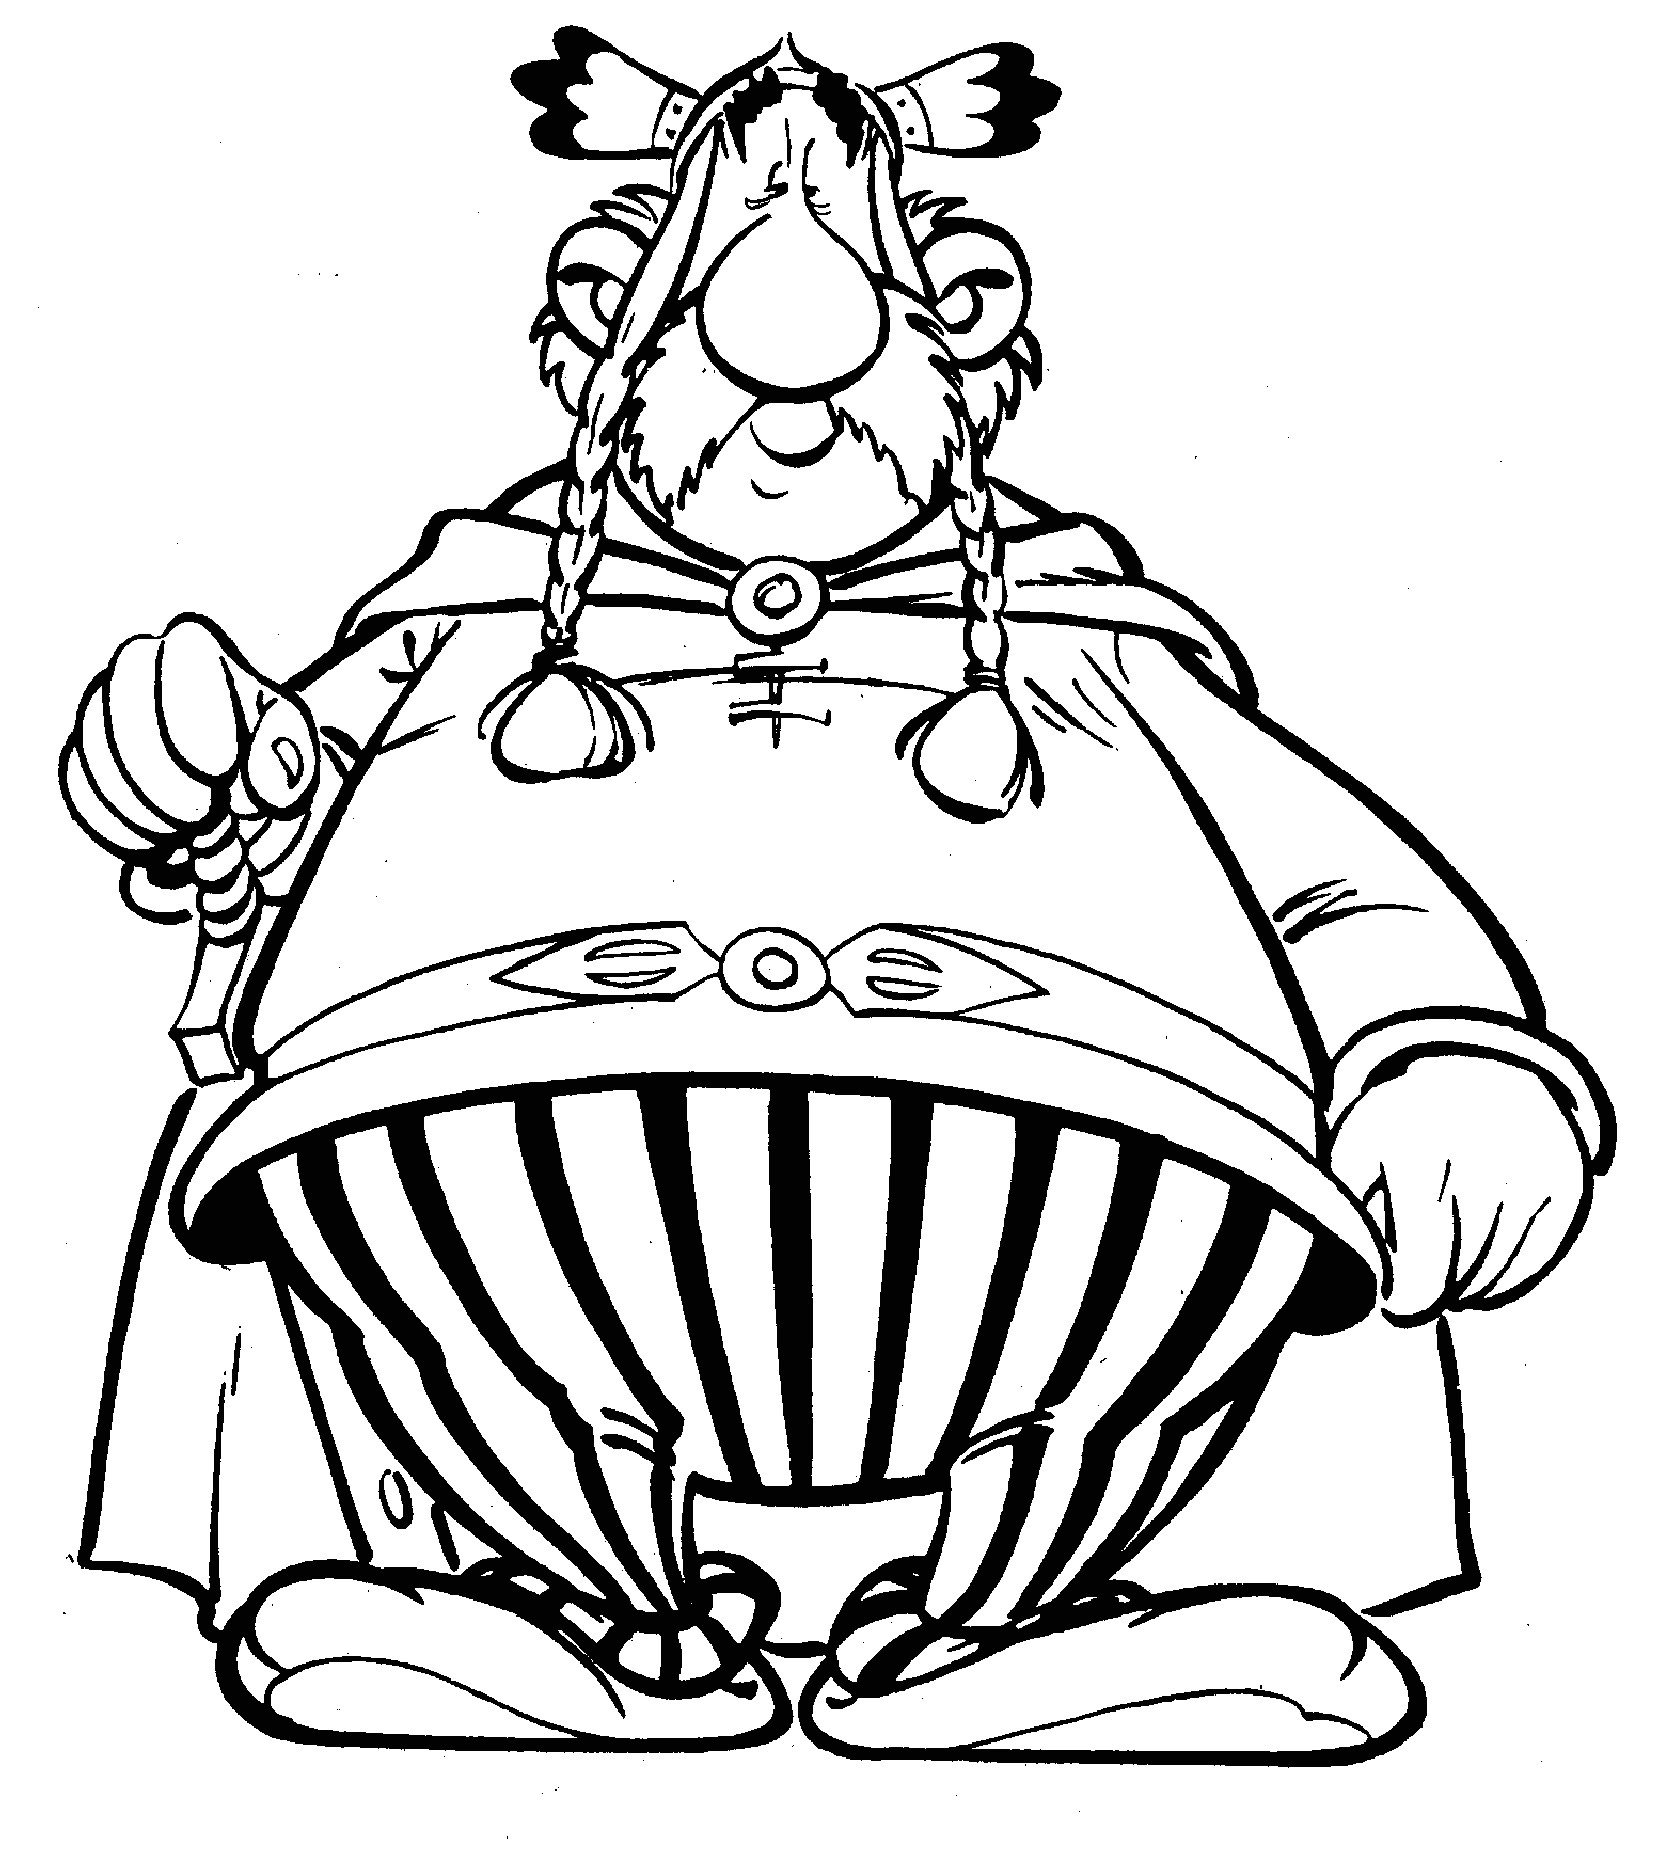 Coloring pages Tv series coloring pages Asterix and obelix